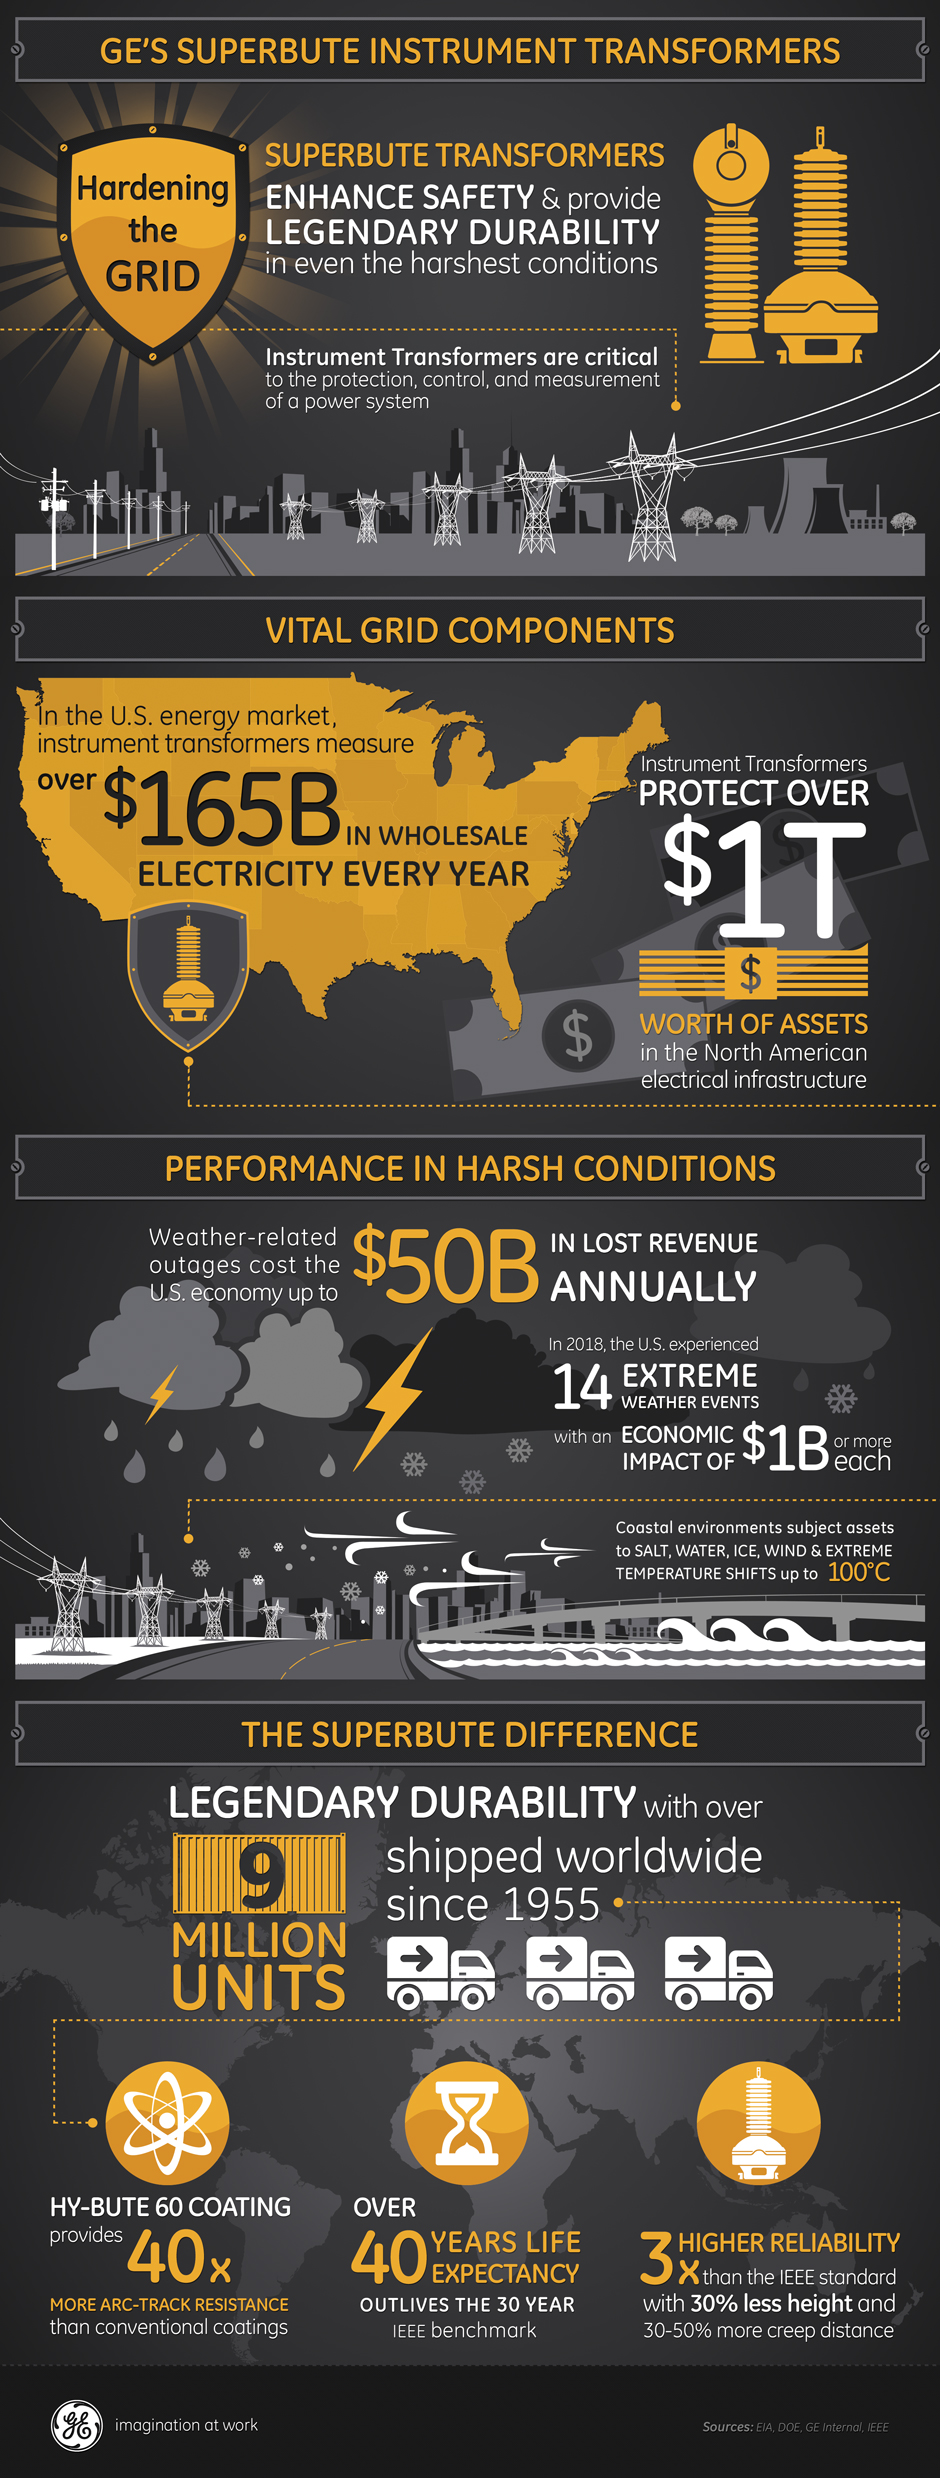 GE's Superbute Transformers infographic